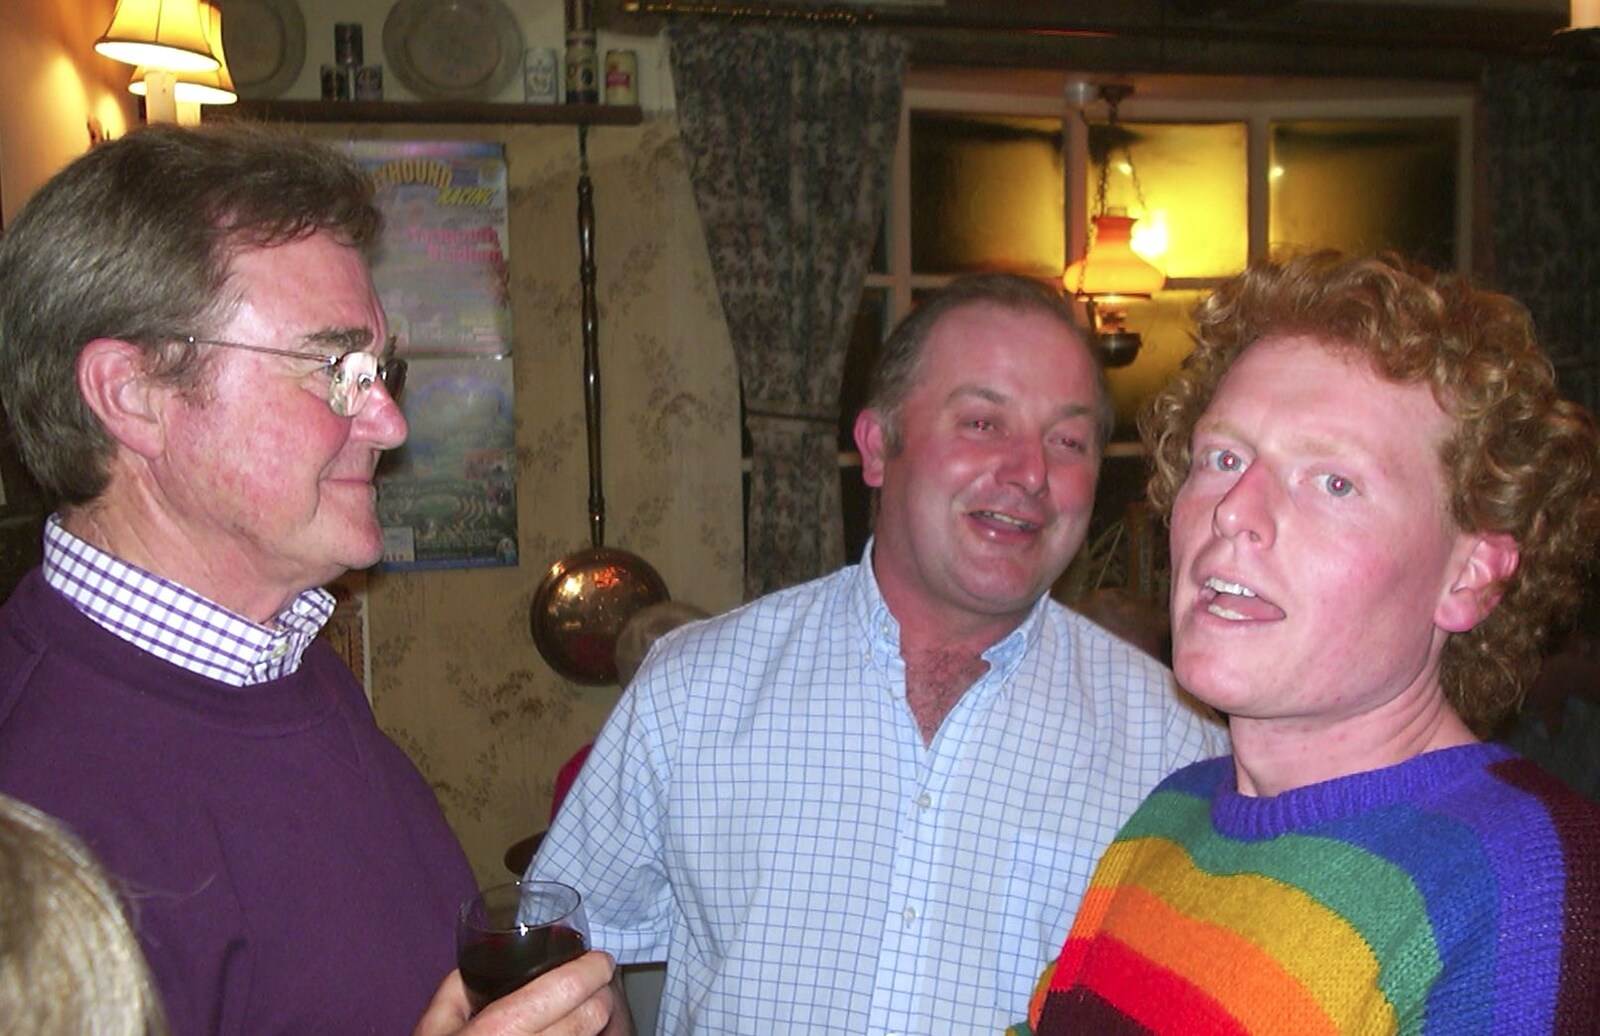 Peter Allan, Ian C and Wavy from Spammy's 50th Birthday at the Swan Inn, Brome, Suffolk - 26th April 2003